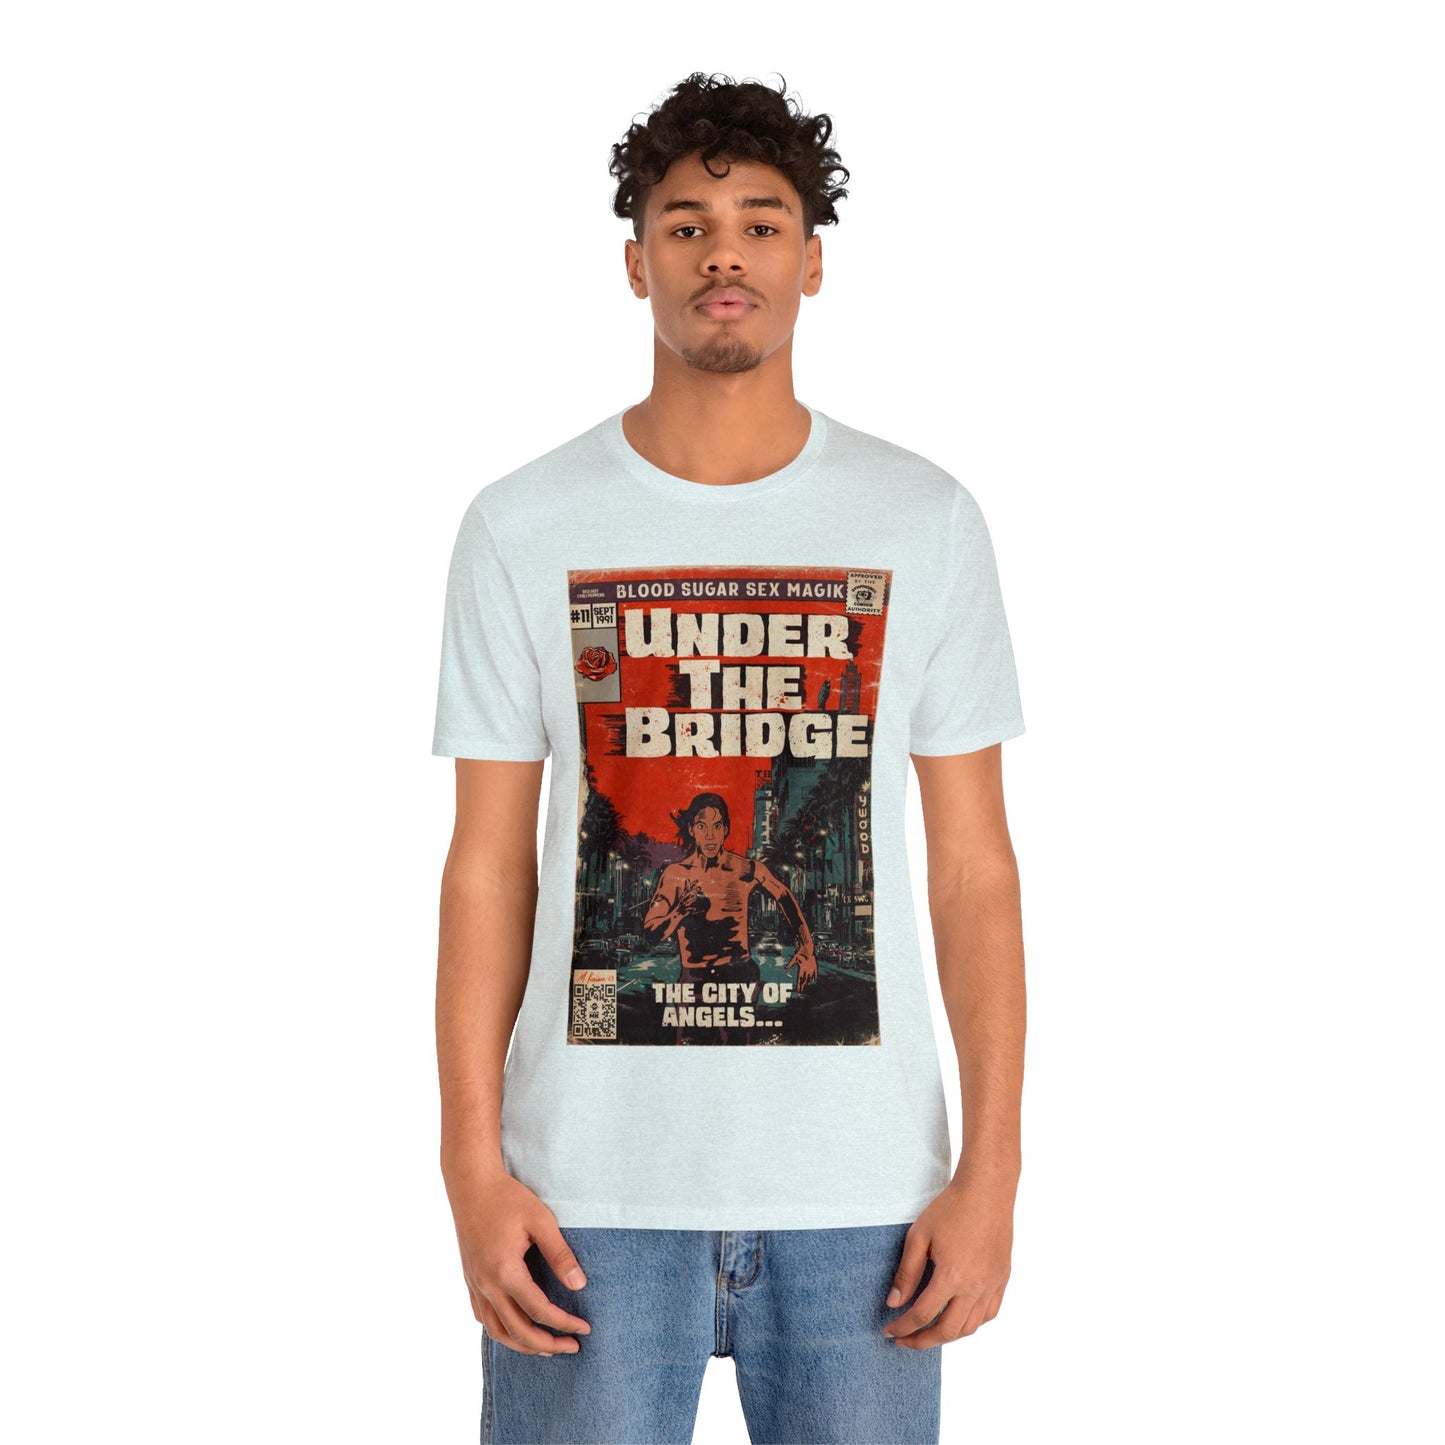 Red Hot Chili Peppers- Under The Bridge - Unisex Jersey Short Sleeve Tee